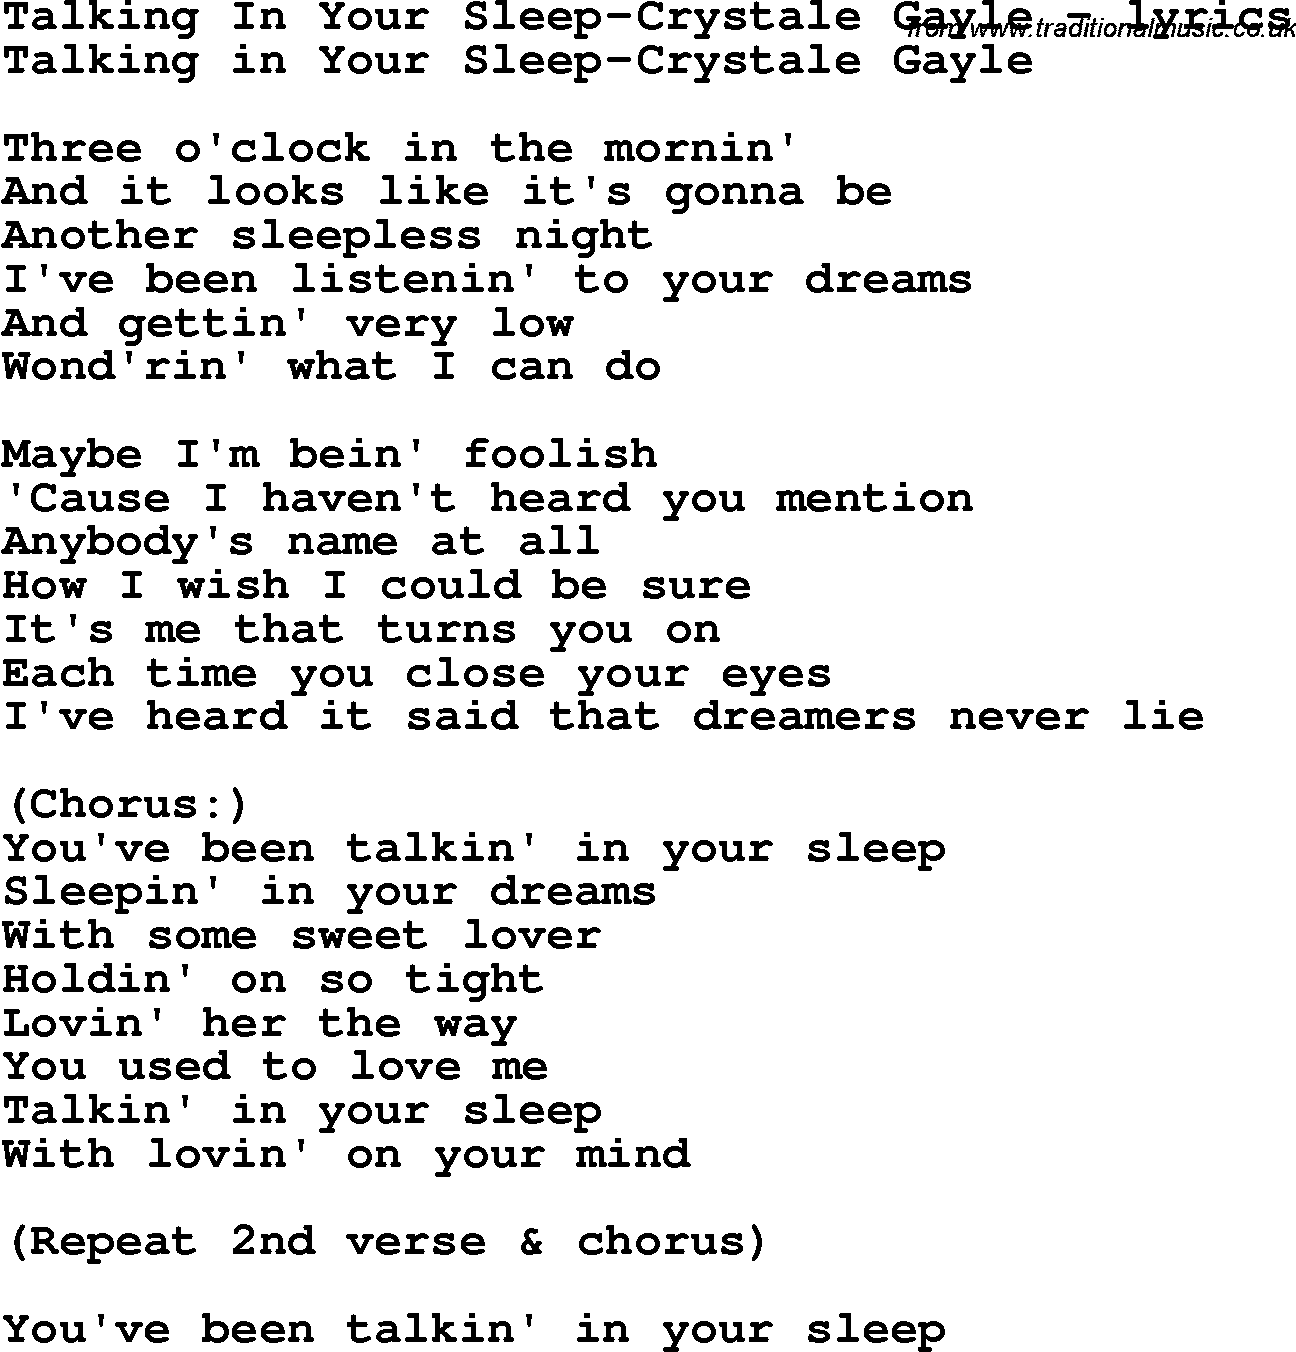 Love Song Lyrics for: Talking In Your Sleep-Crystale Gayle